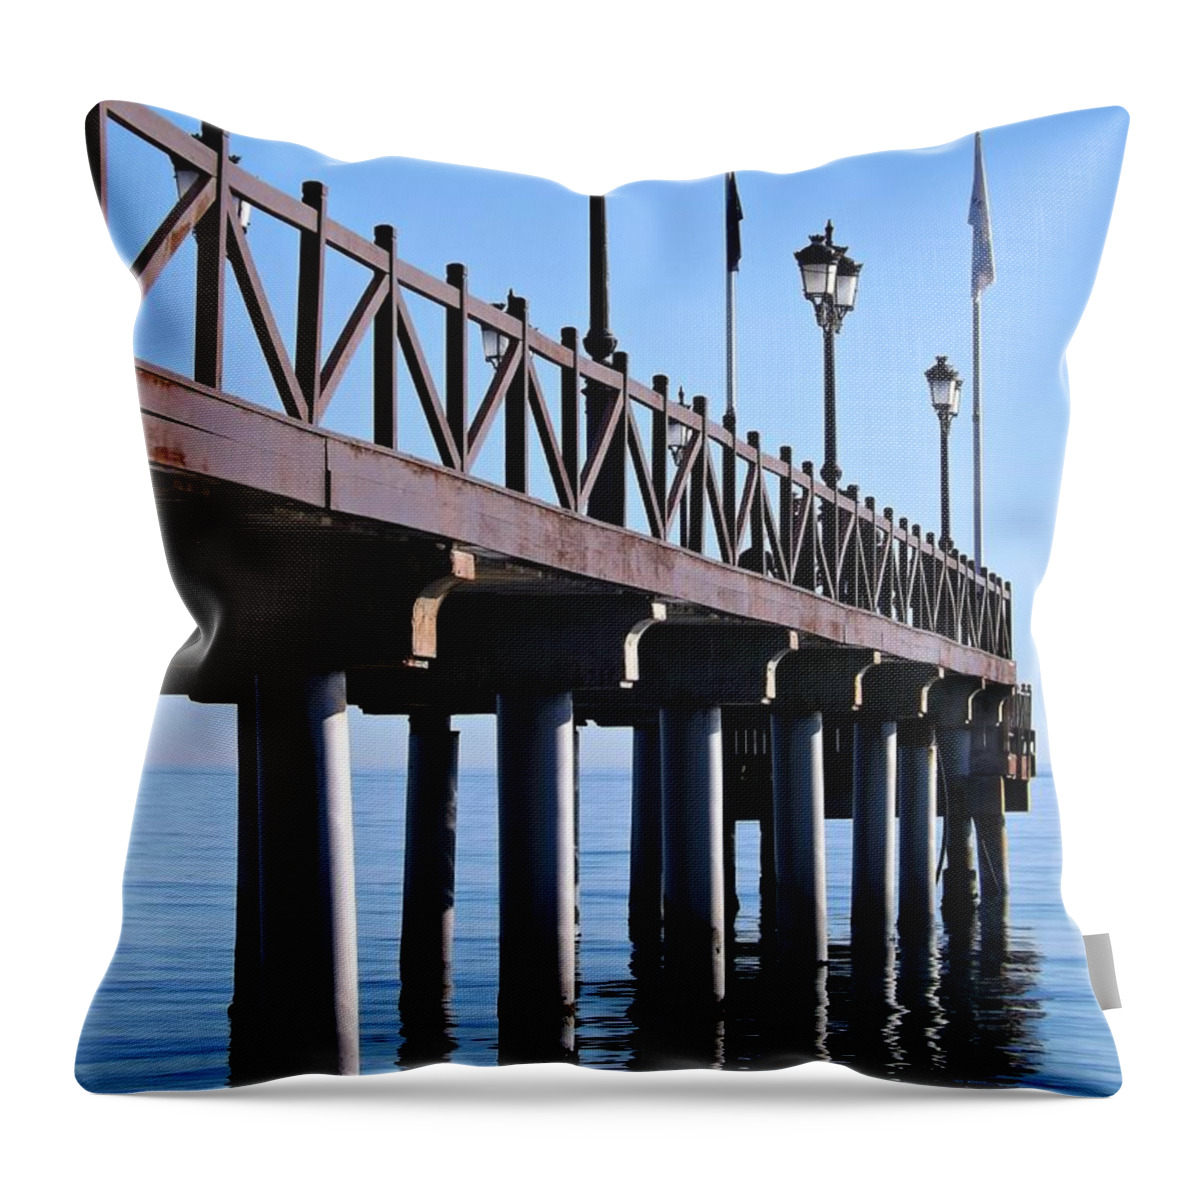 Pier Throw Pillow featuring the photograph Marbella Pier Spain by Clare Bevan